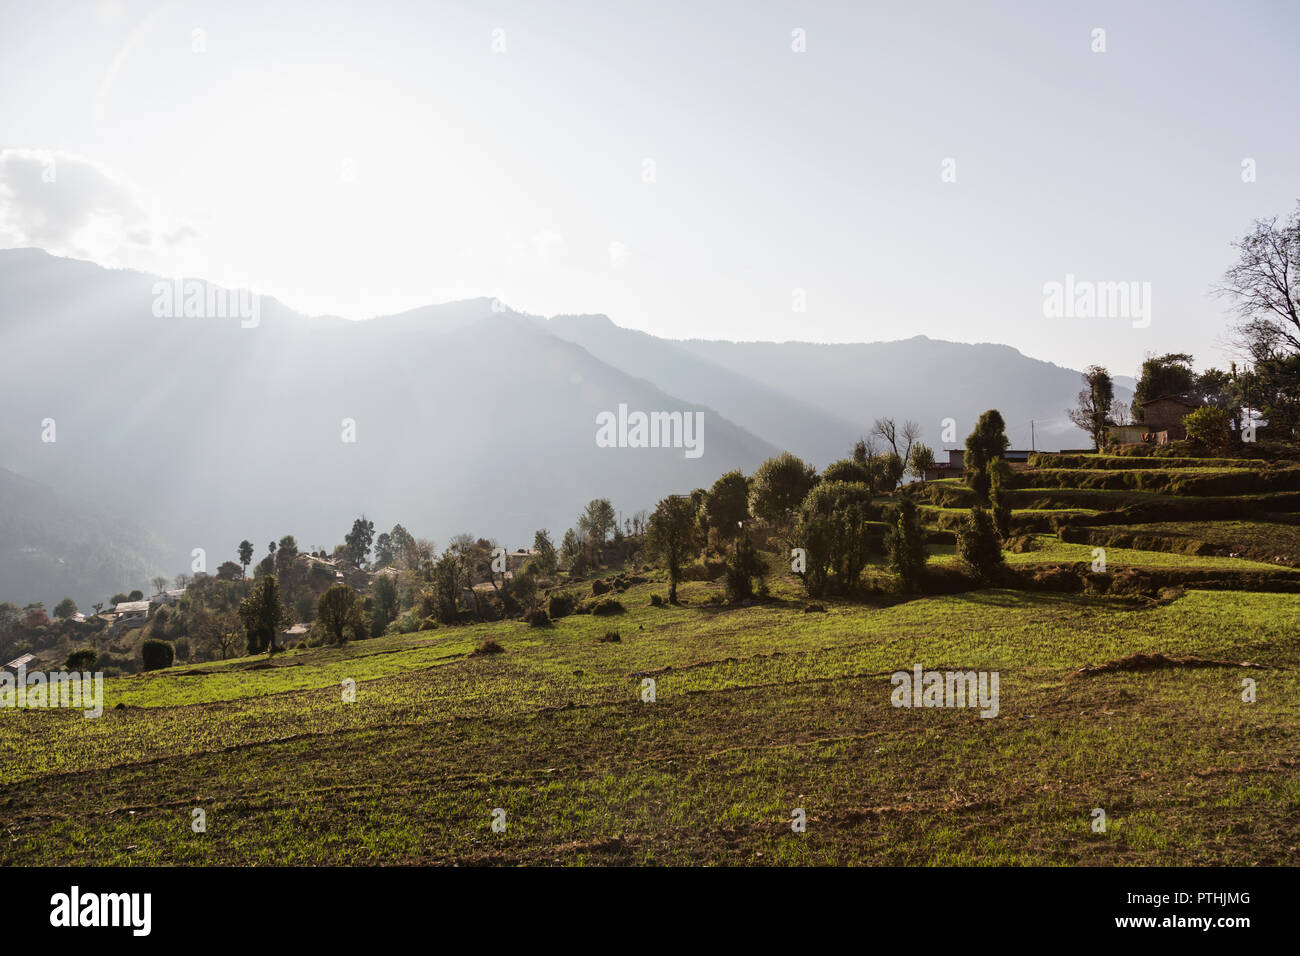 Sunny, tranquil scenic view, Supi Bageshwar, Uttarakhand, Indian Himalayan Foothills Stock Photo